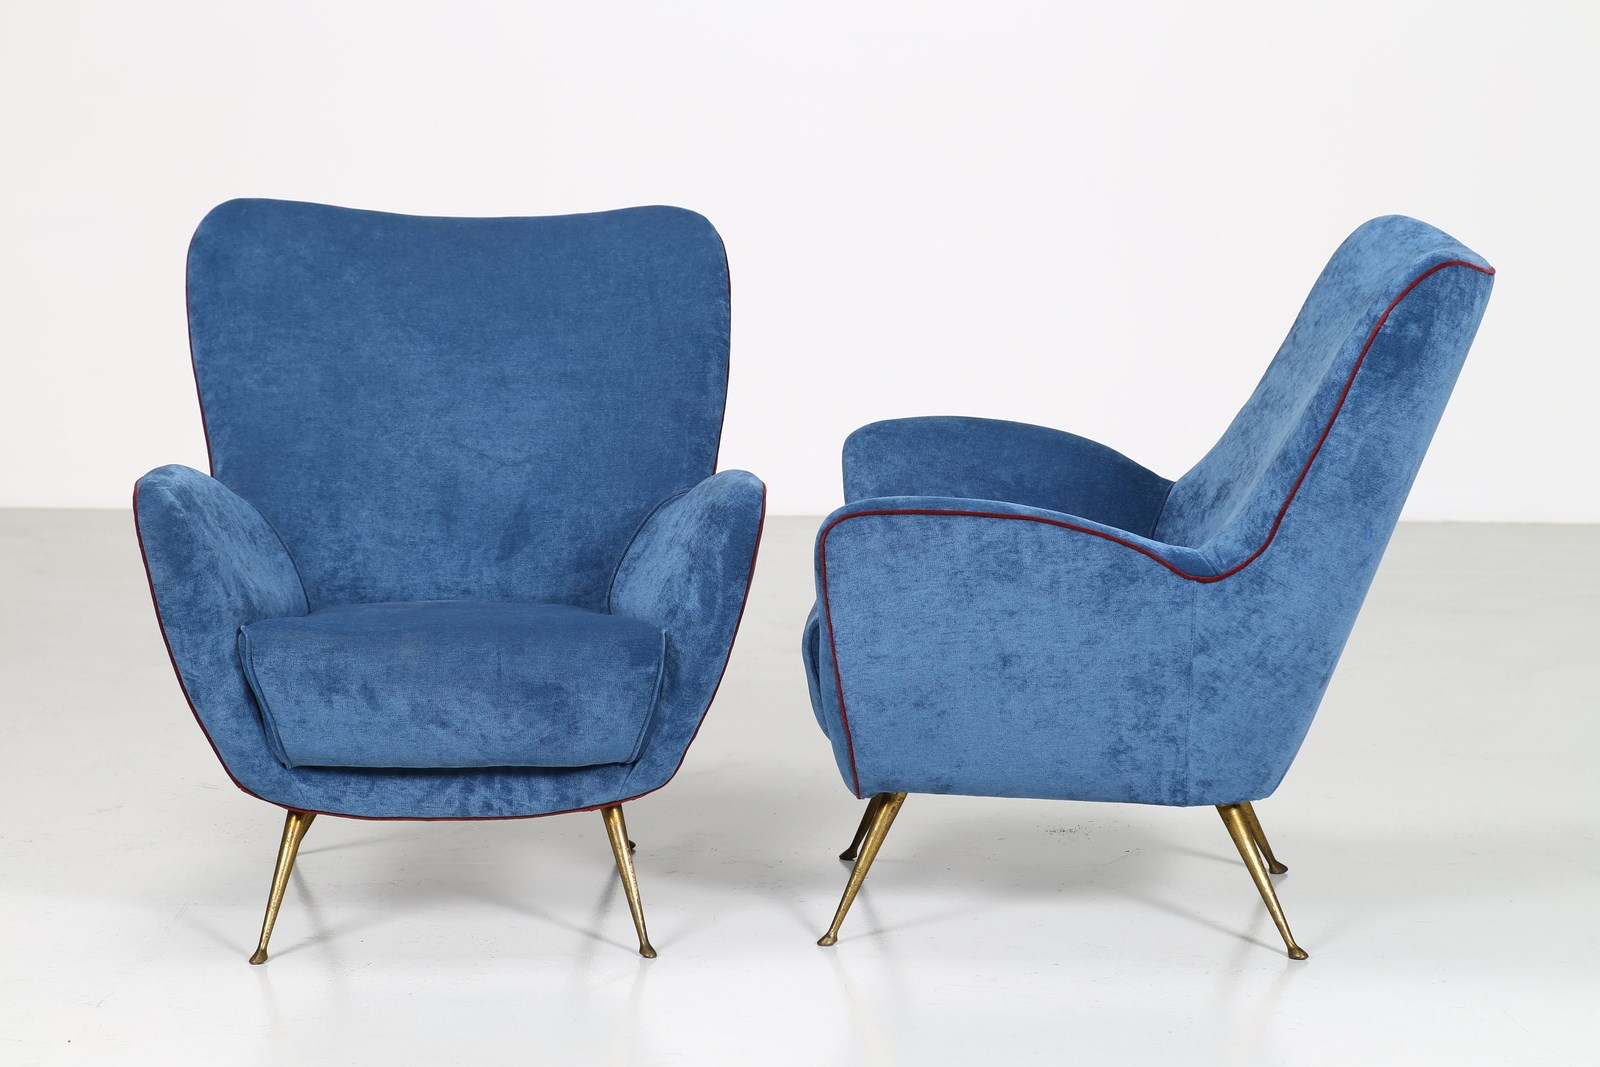 MELCHIORRE BEGA Attributed to. Pair of armchairs. - Image 5 of 7